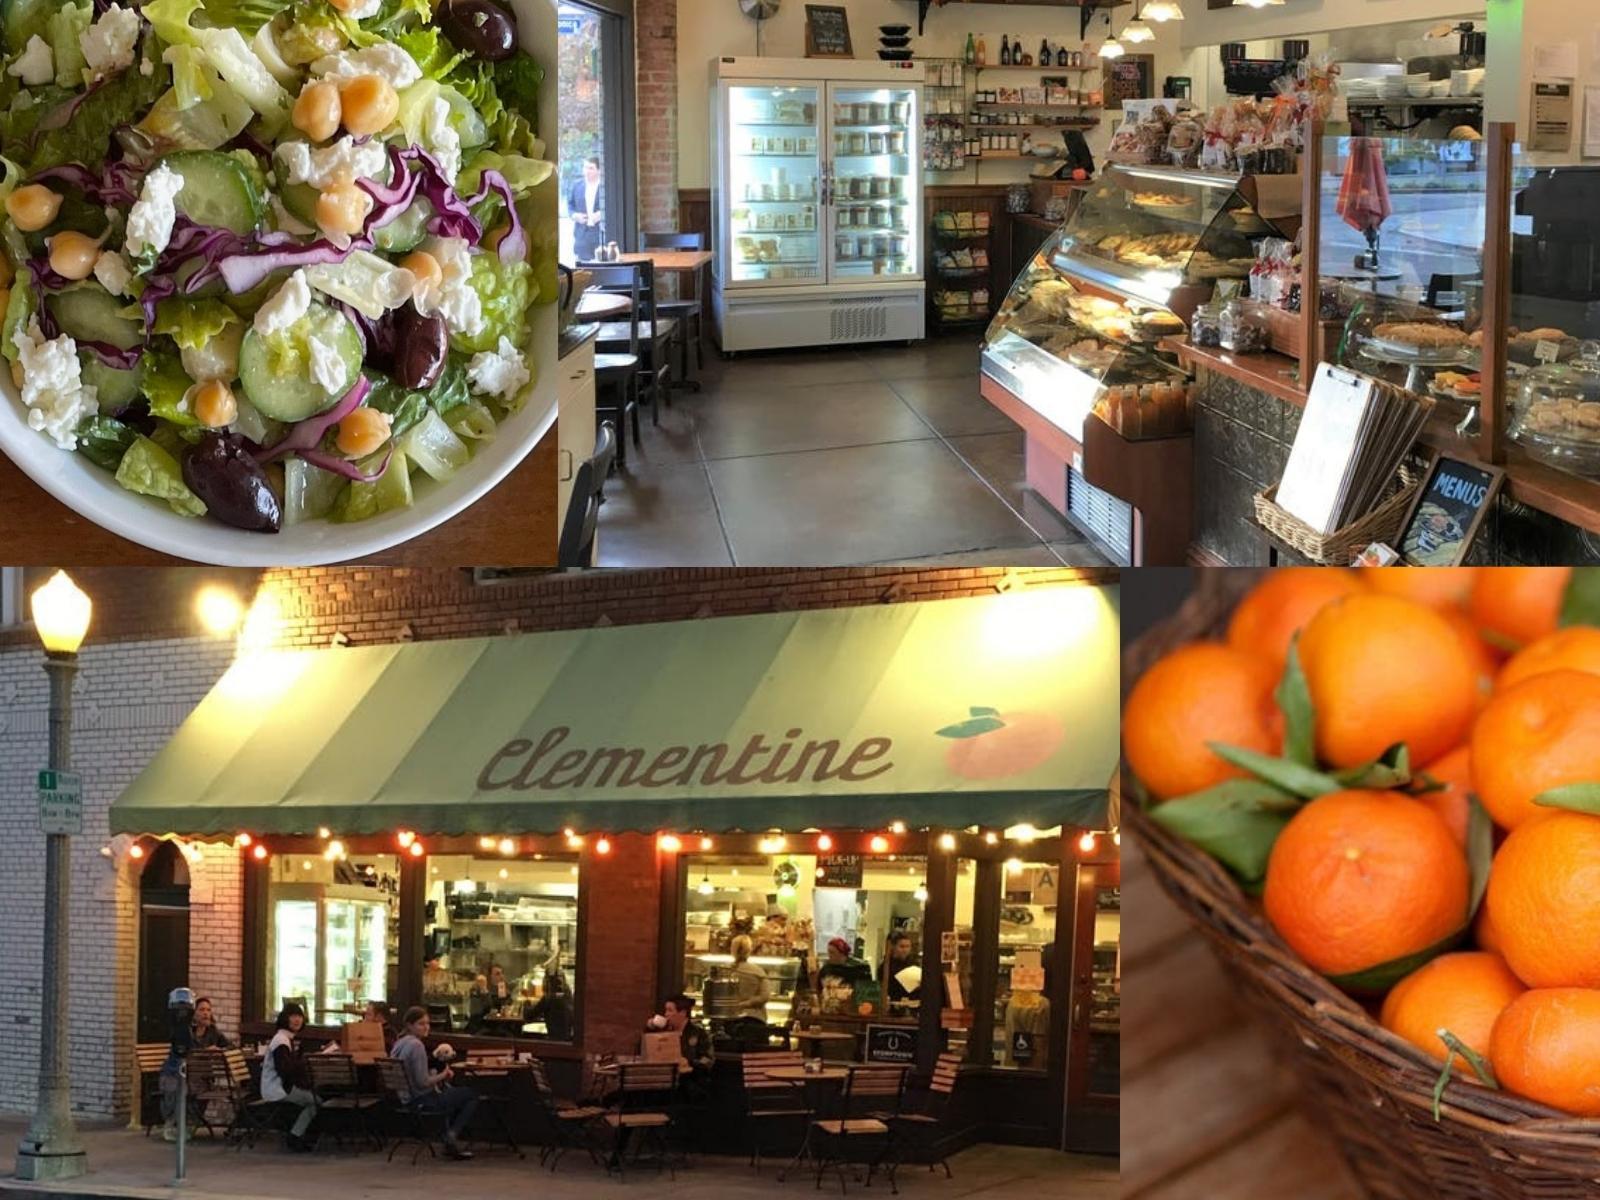 Photo collage with Greek Salad, interior of store, exterior storefront, basket of clementines